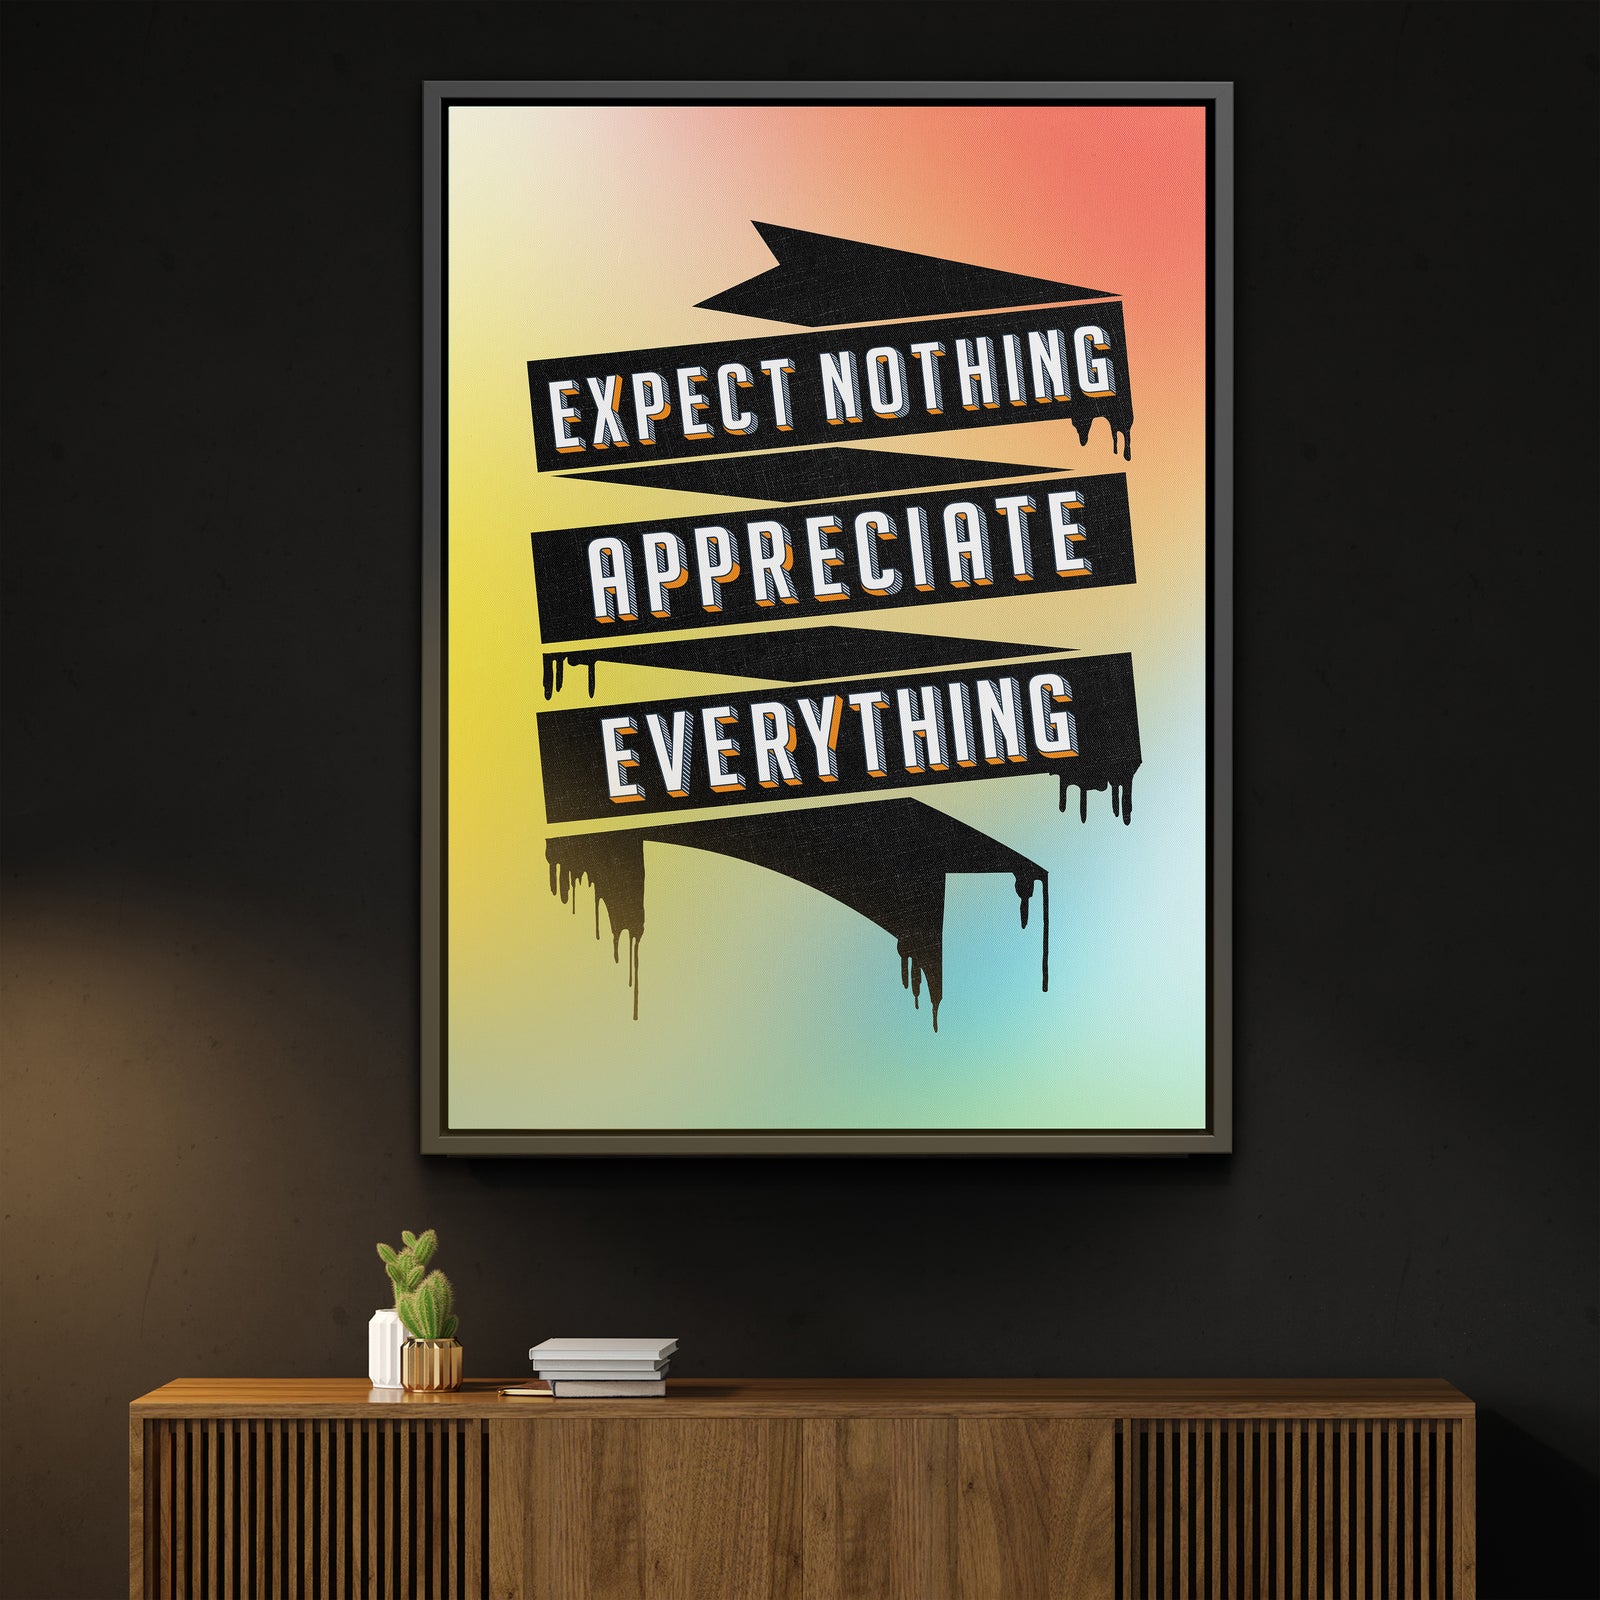 Expect Nothing, Appreciate Everything - The Art Of Grateful